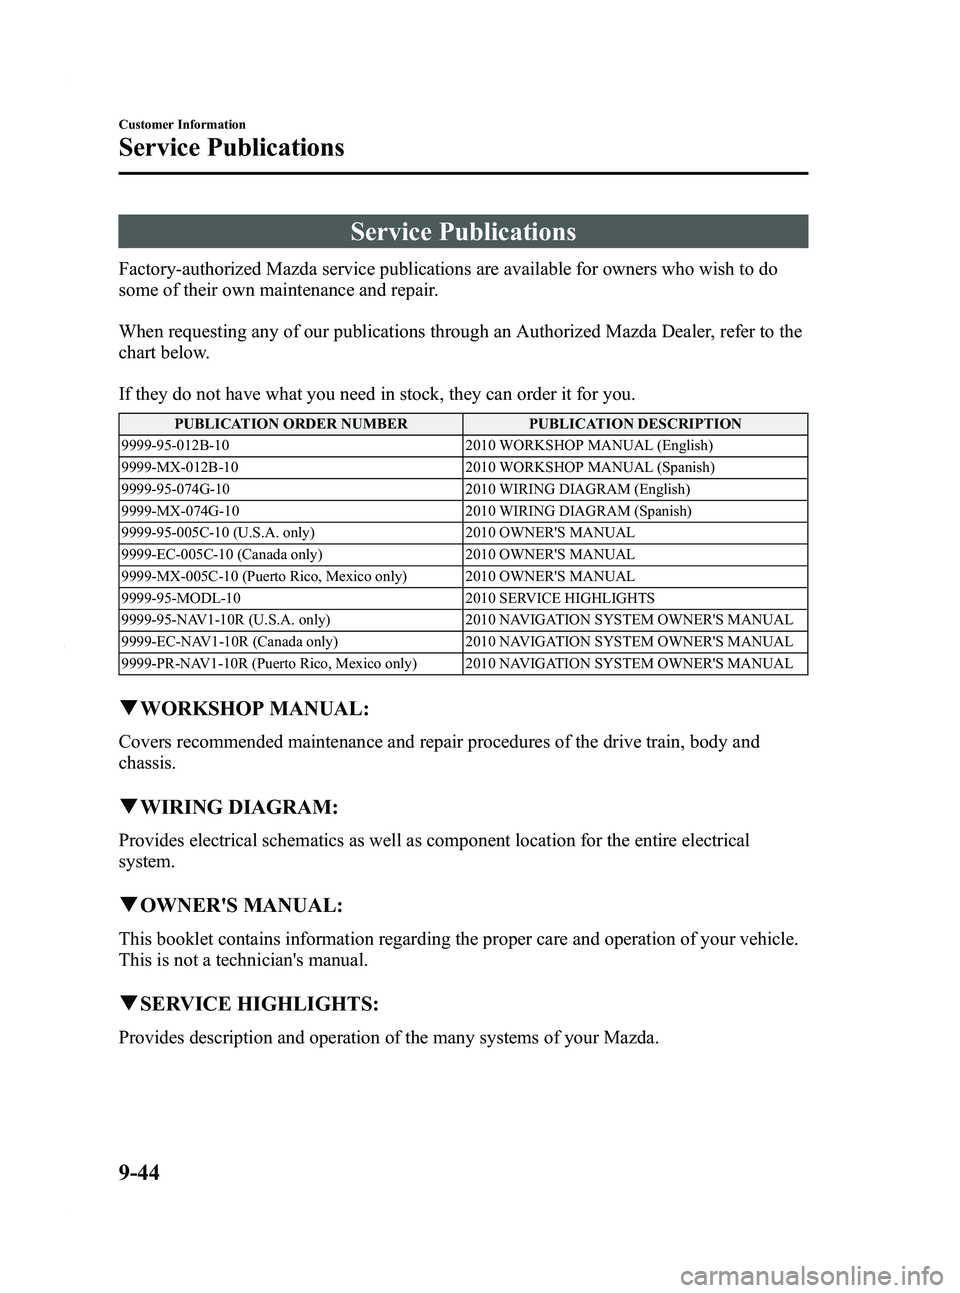 MAZDA MODEL 5 2010  Owners Manual Black plate (374,1)
Service Publications
Factory-authorized Mazda service publications are available for owners who wish to do
some of their own maintenance and repair.
When requesting any of our publ